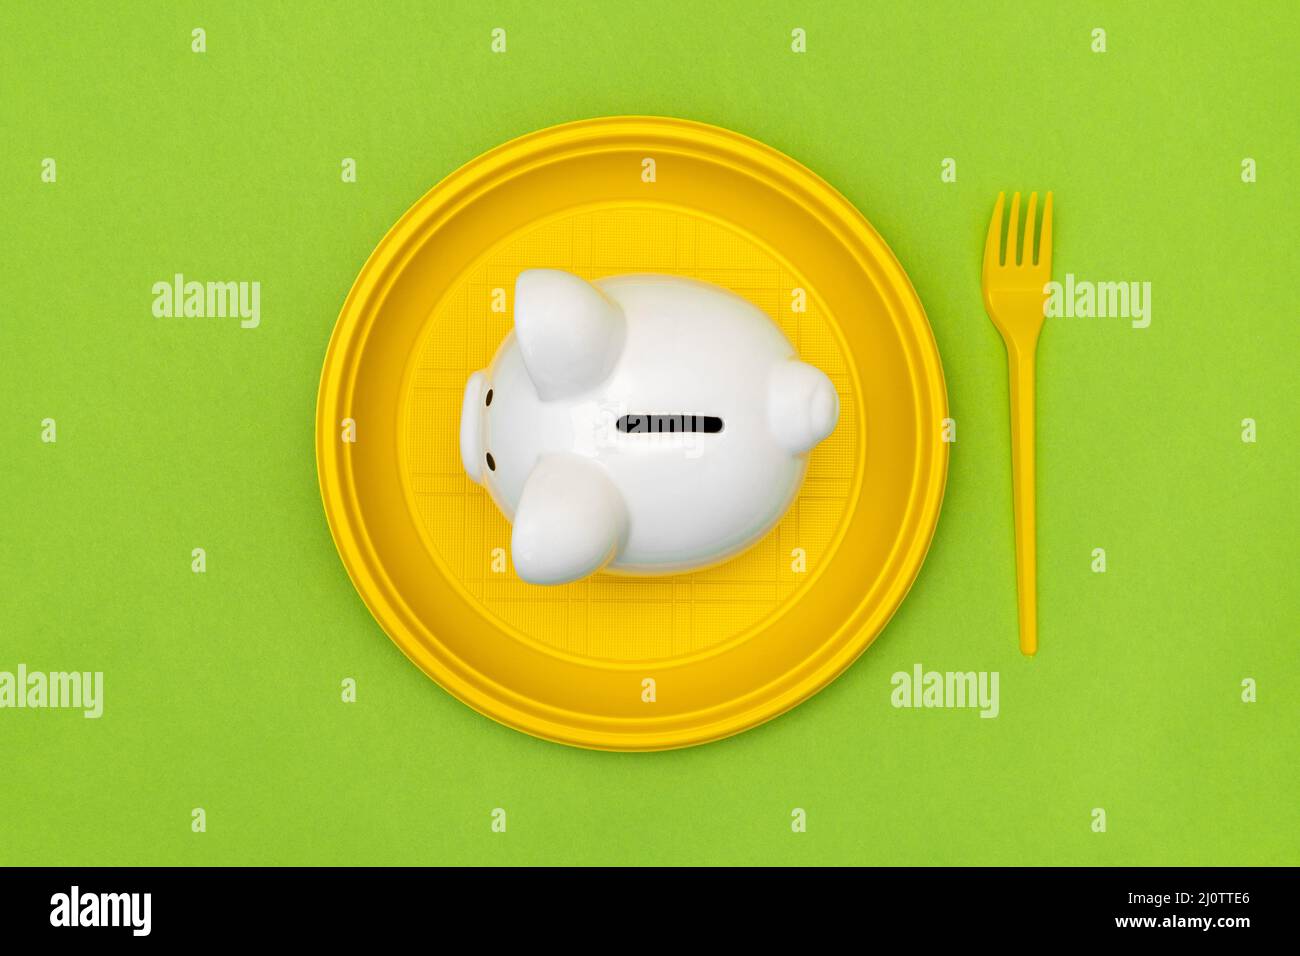 Piggy bank on the yellow disposable plate with a fork Stock Photo